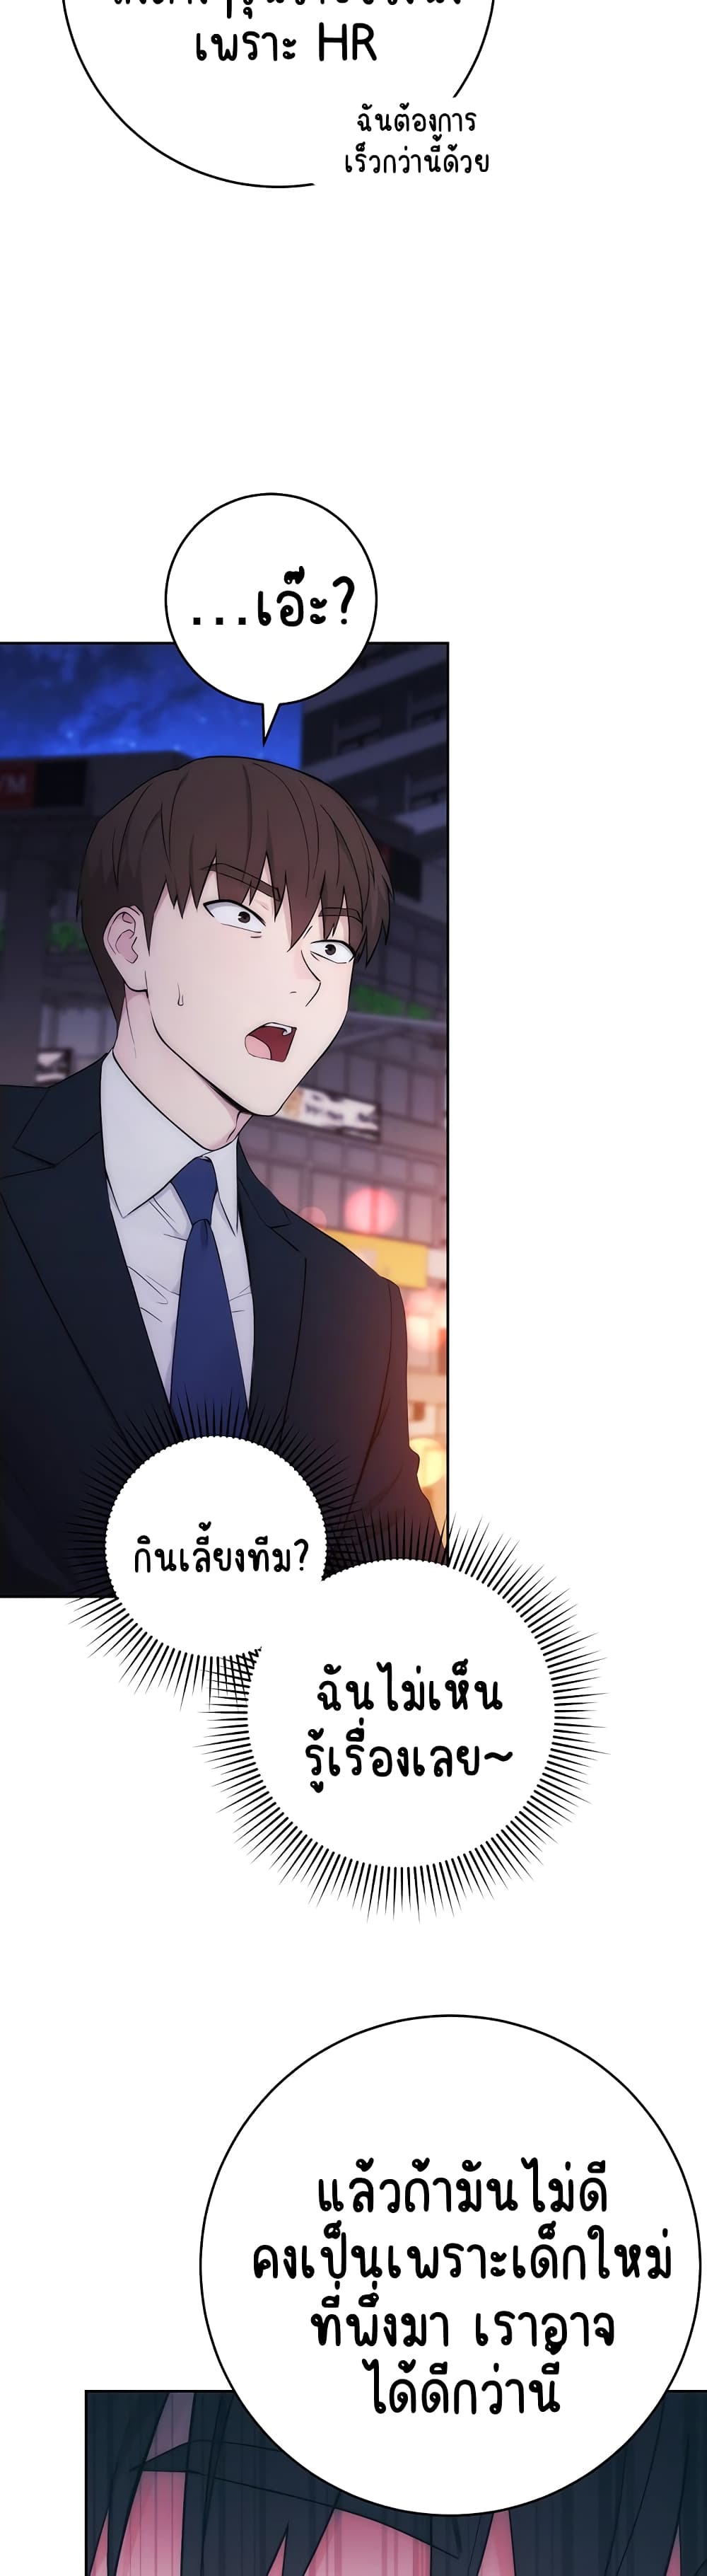 Outsider: The Invisible Man ตอนที่ 1 ภาพ 52